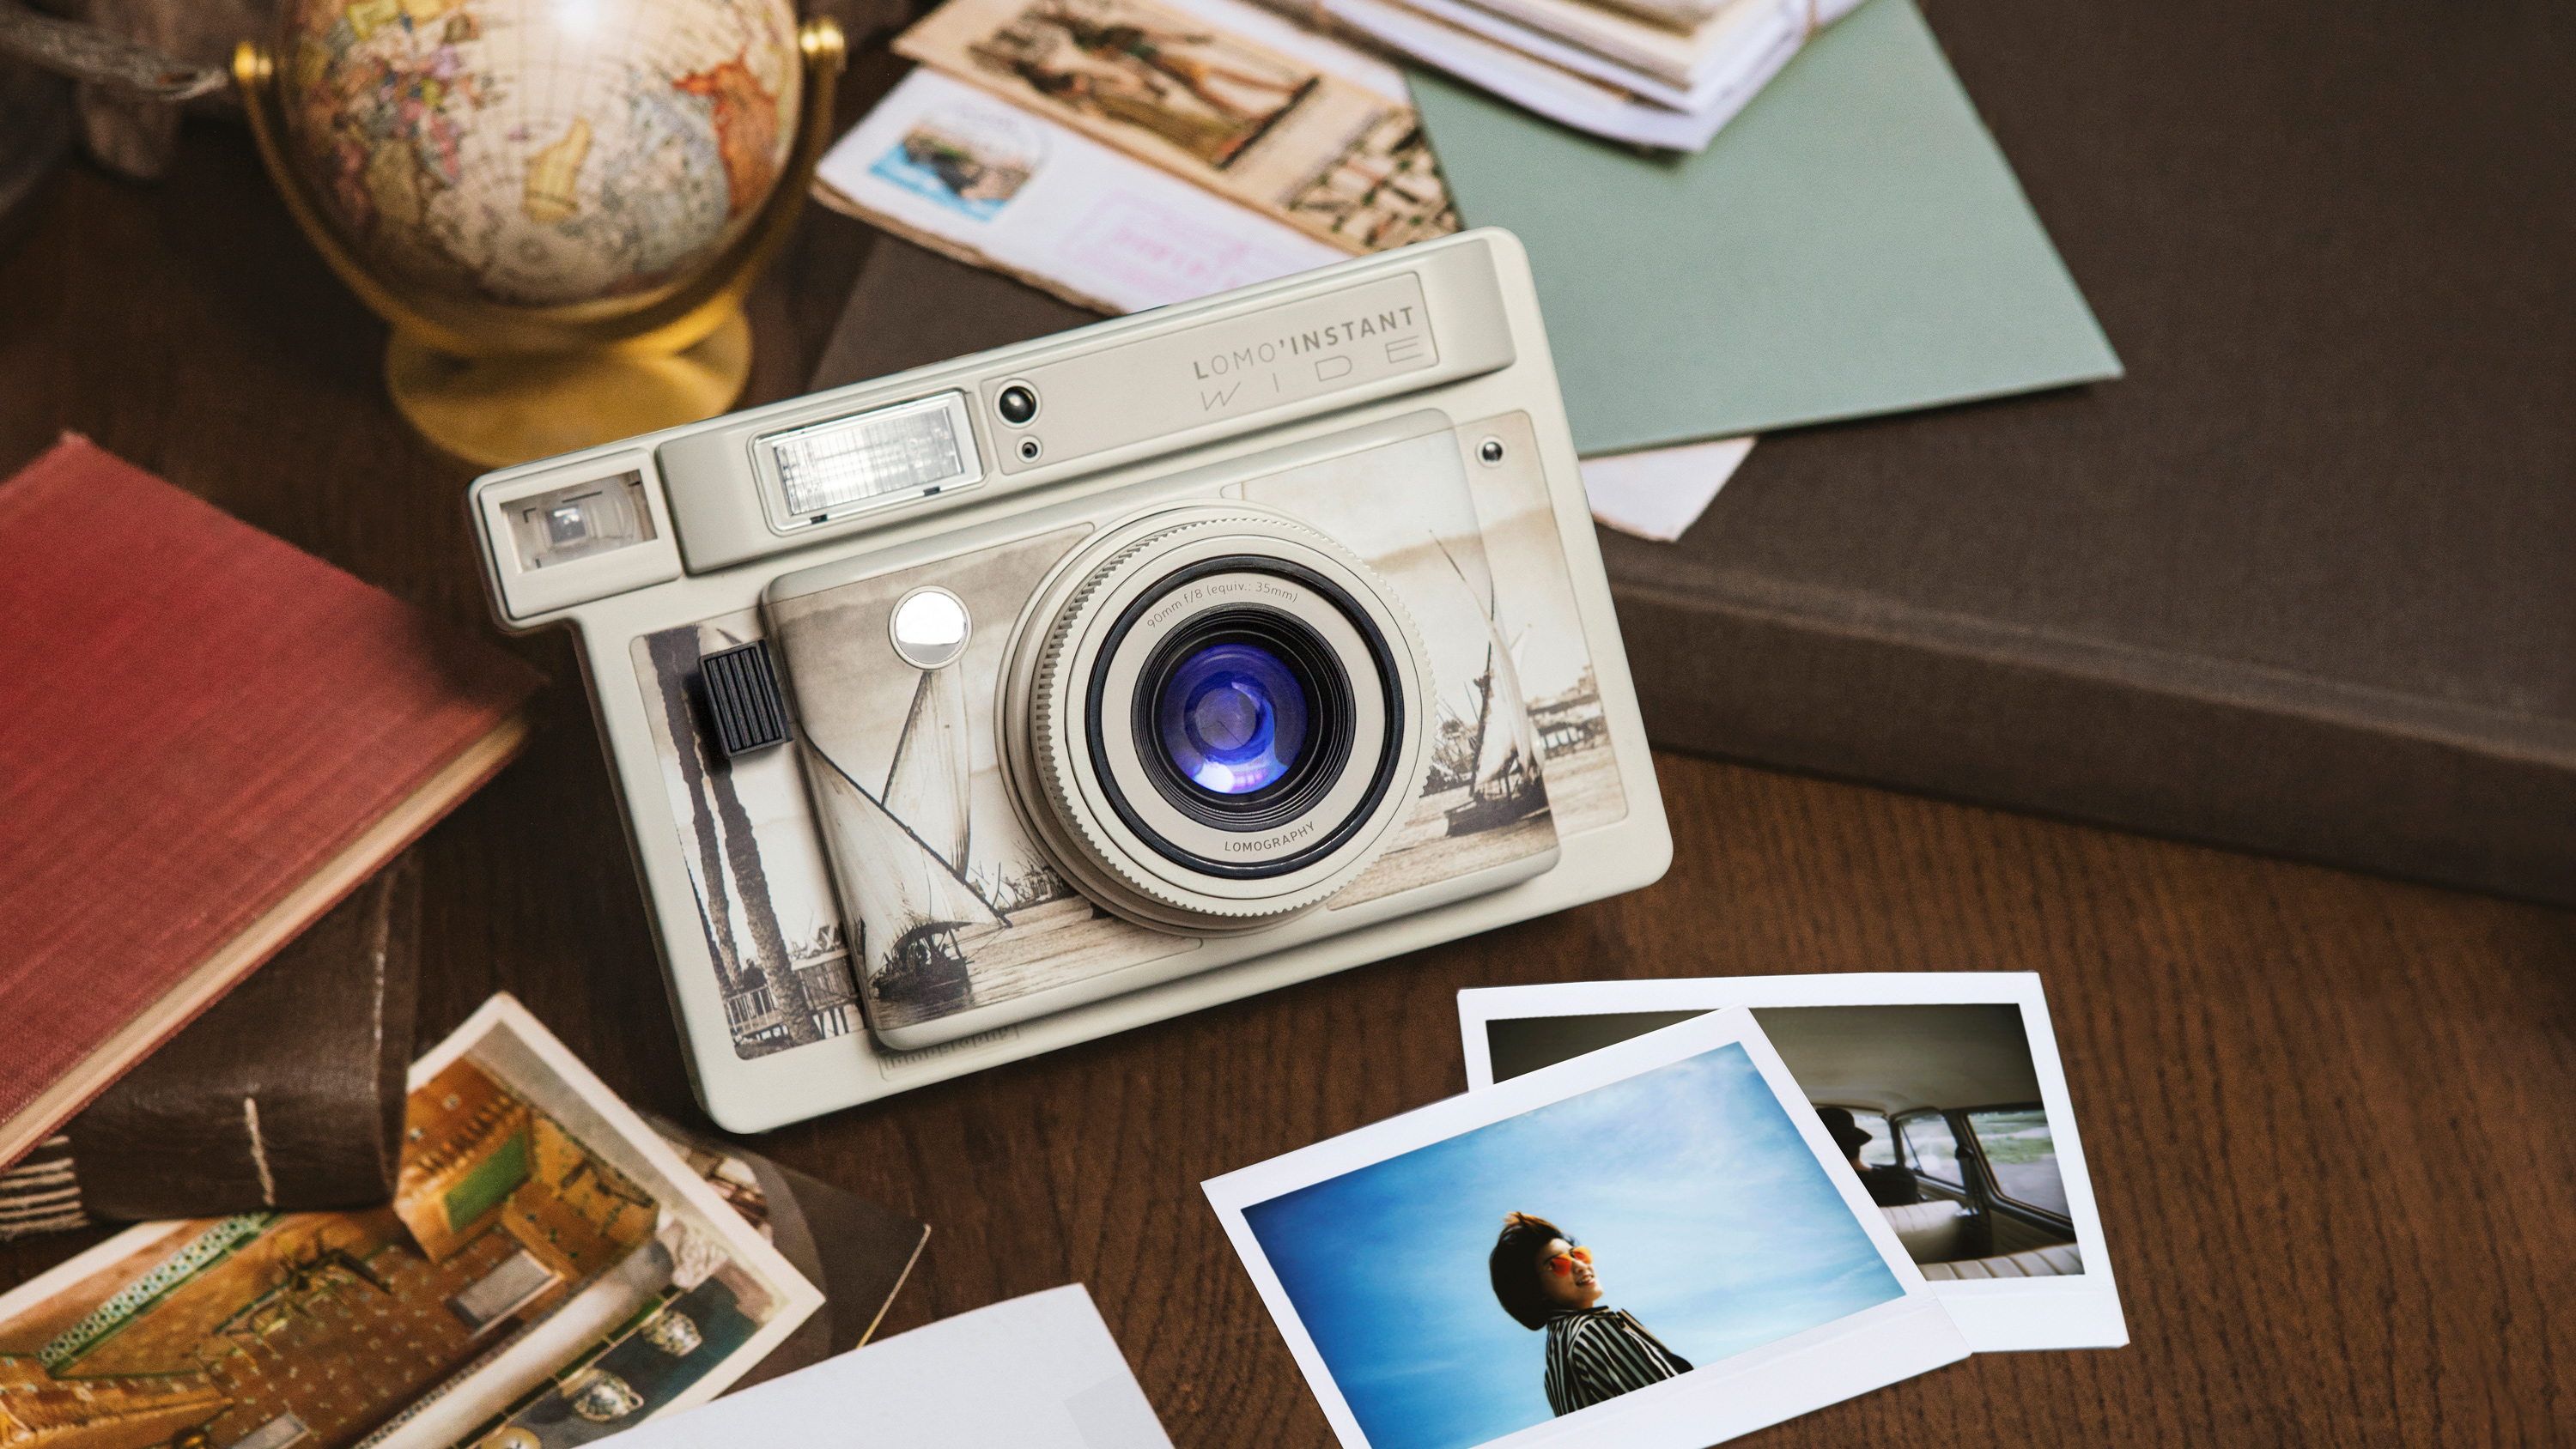 Double Lomo special as Lomography releases 2 limited-edition instant cameras